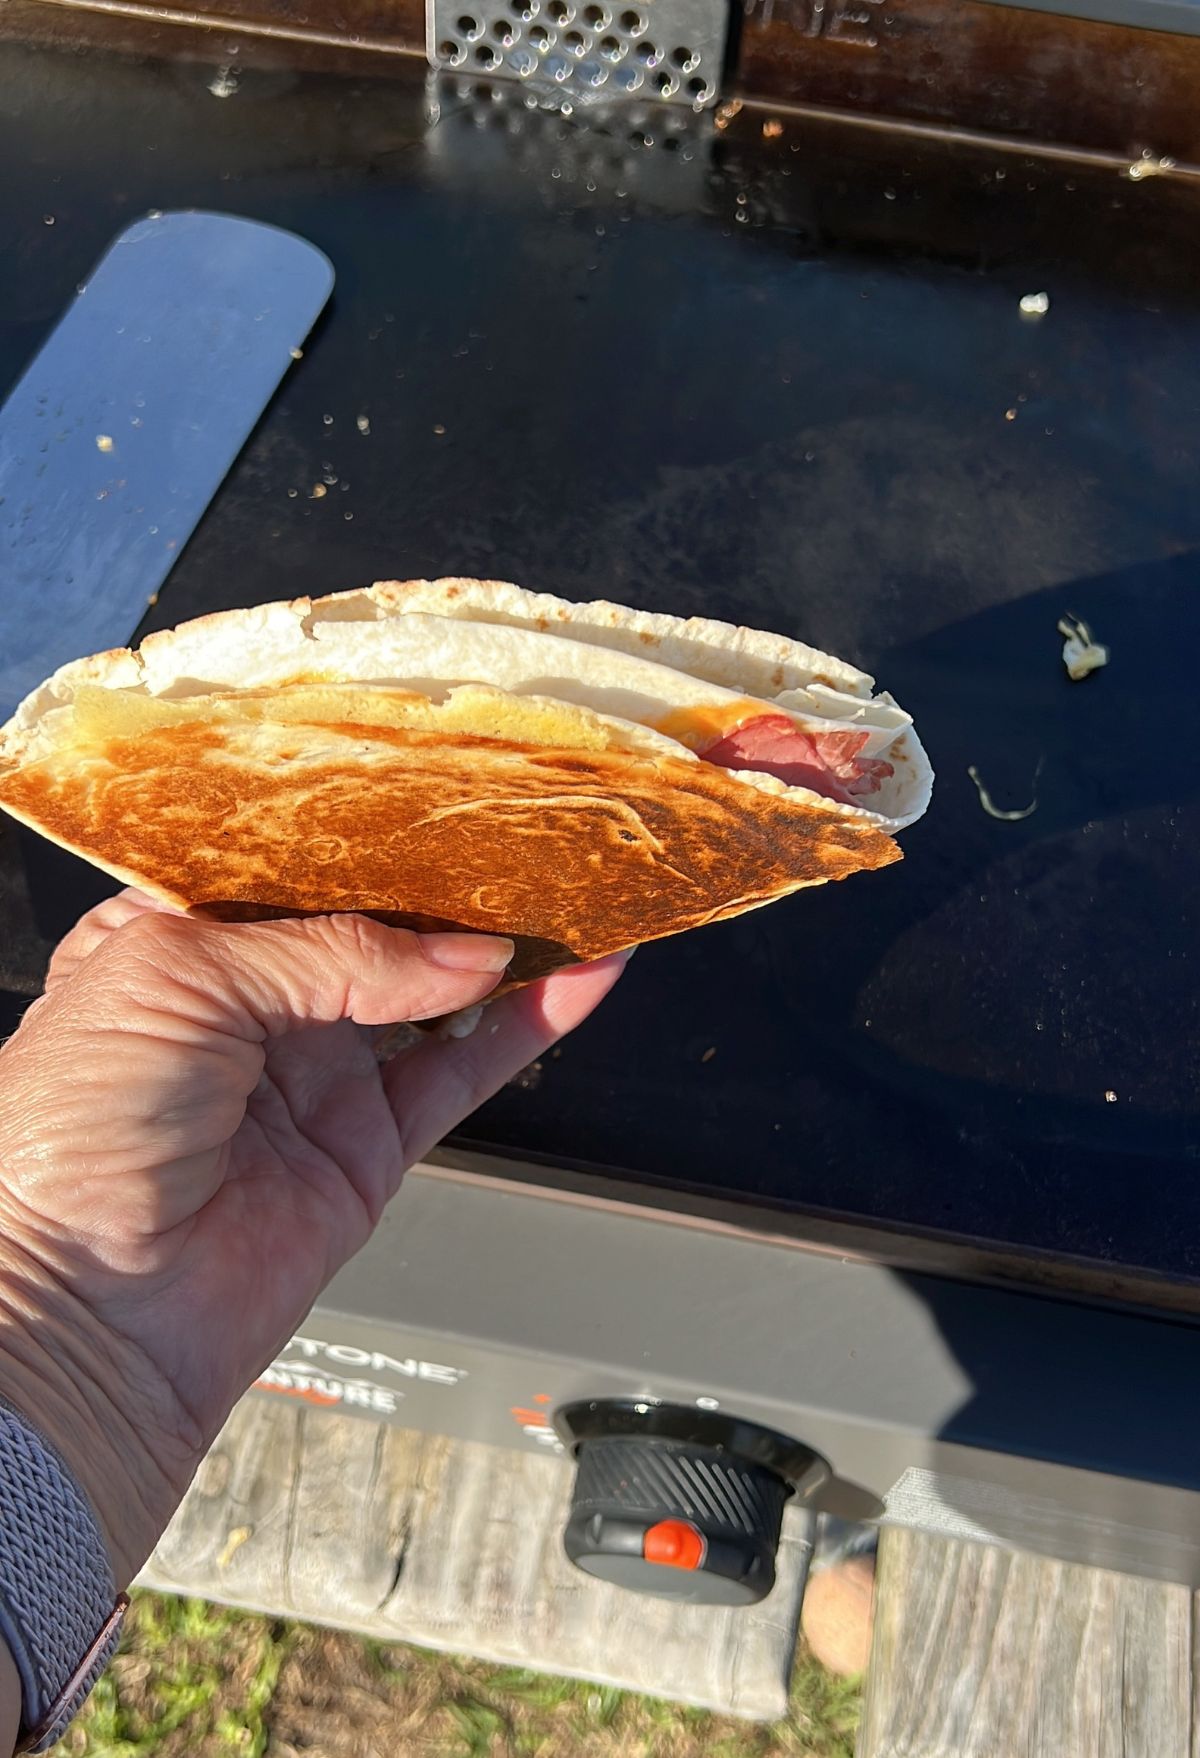 Hand holding an overstuffed sandwich with visible eggs and meats on a griddle background.